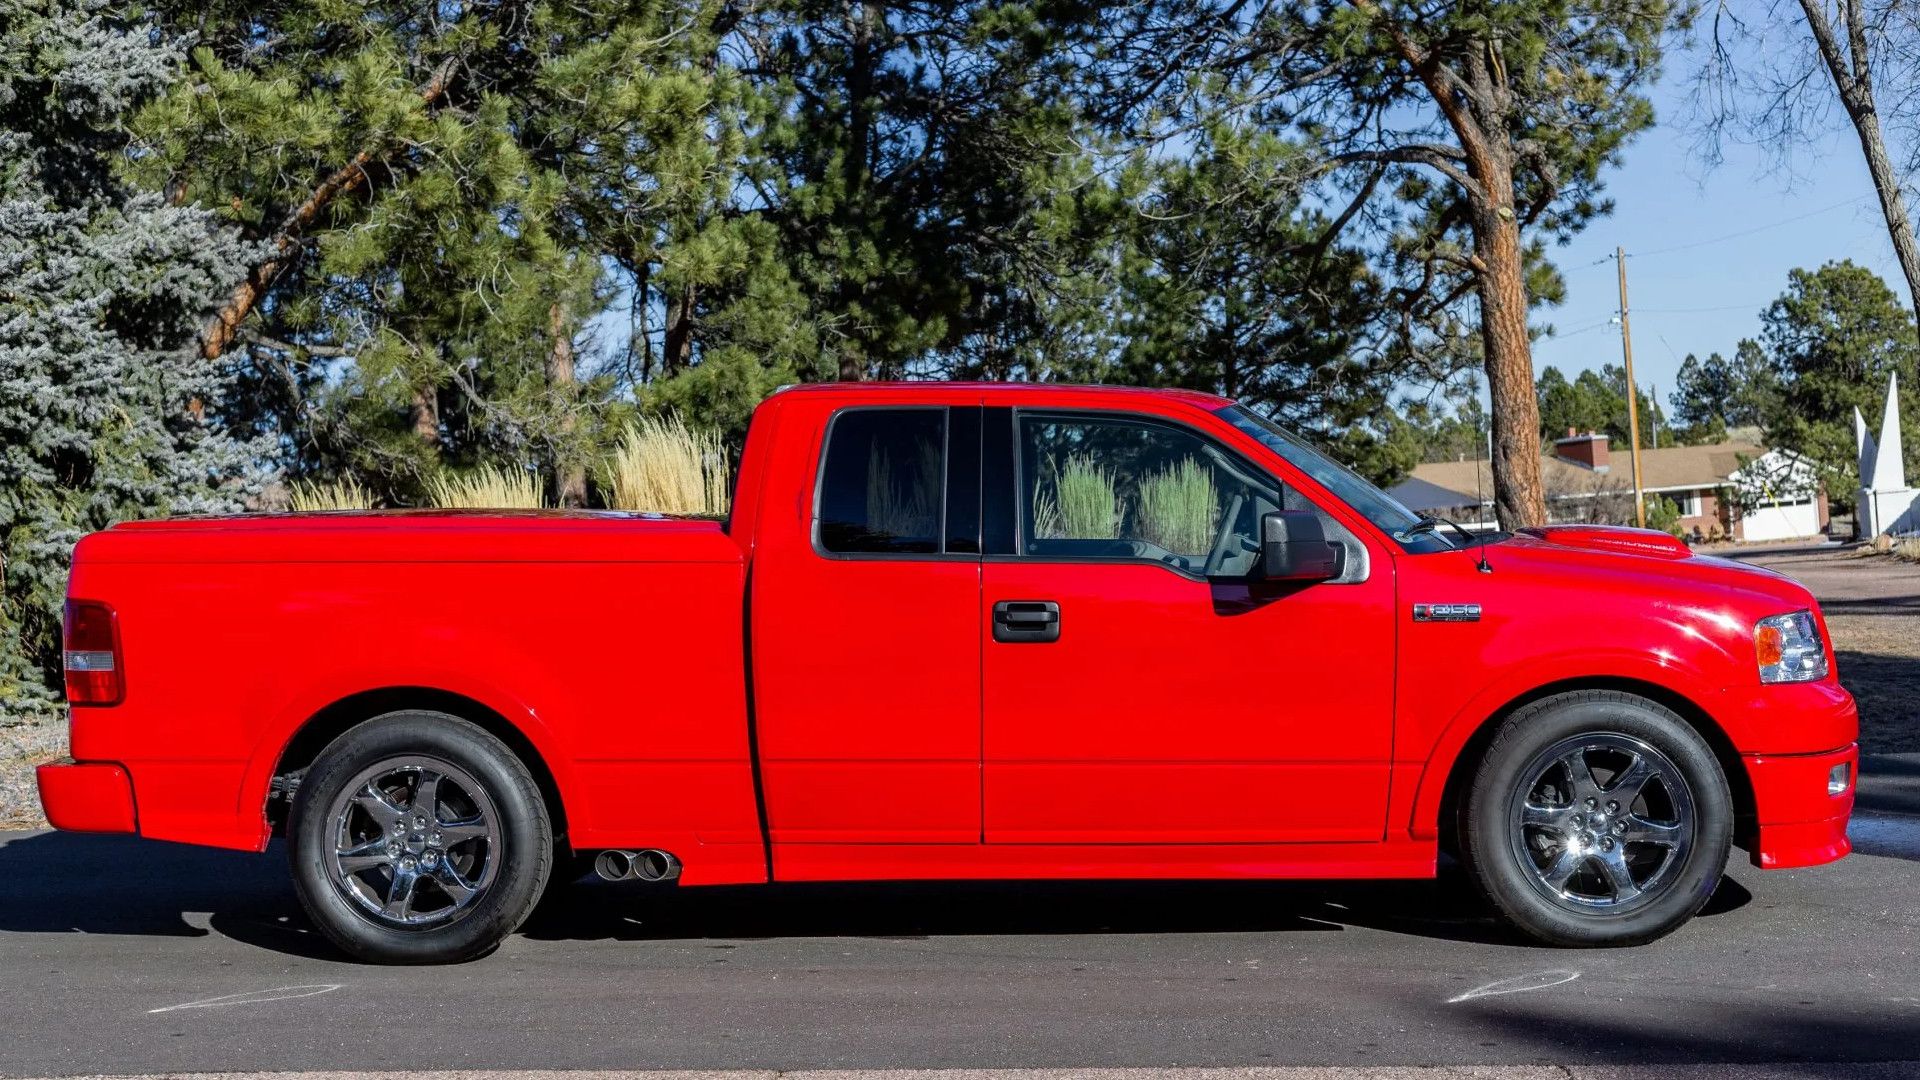 2004 Ford F-150 side